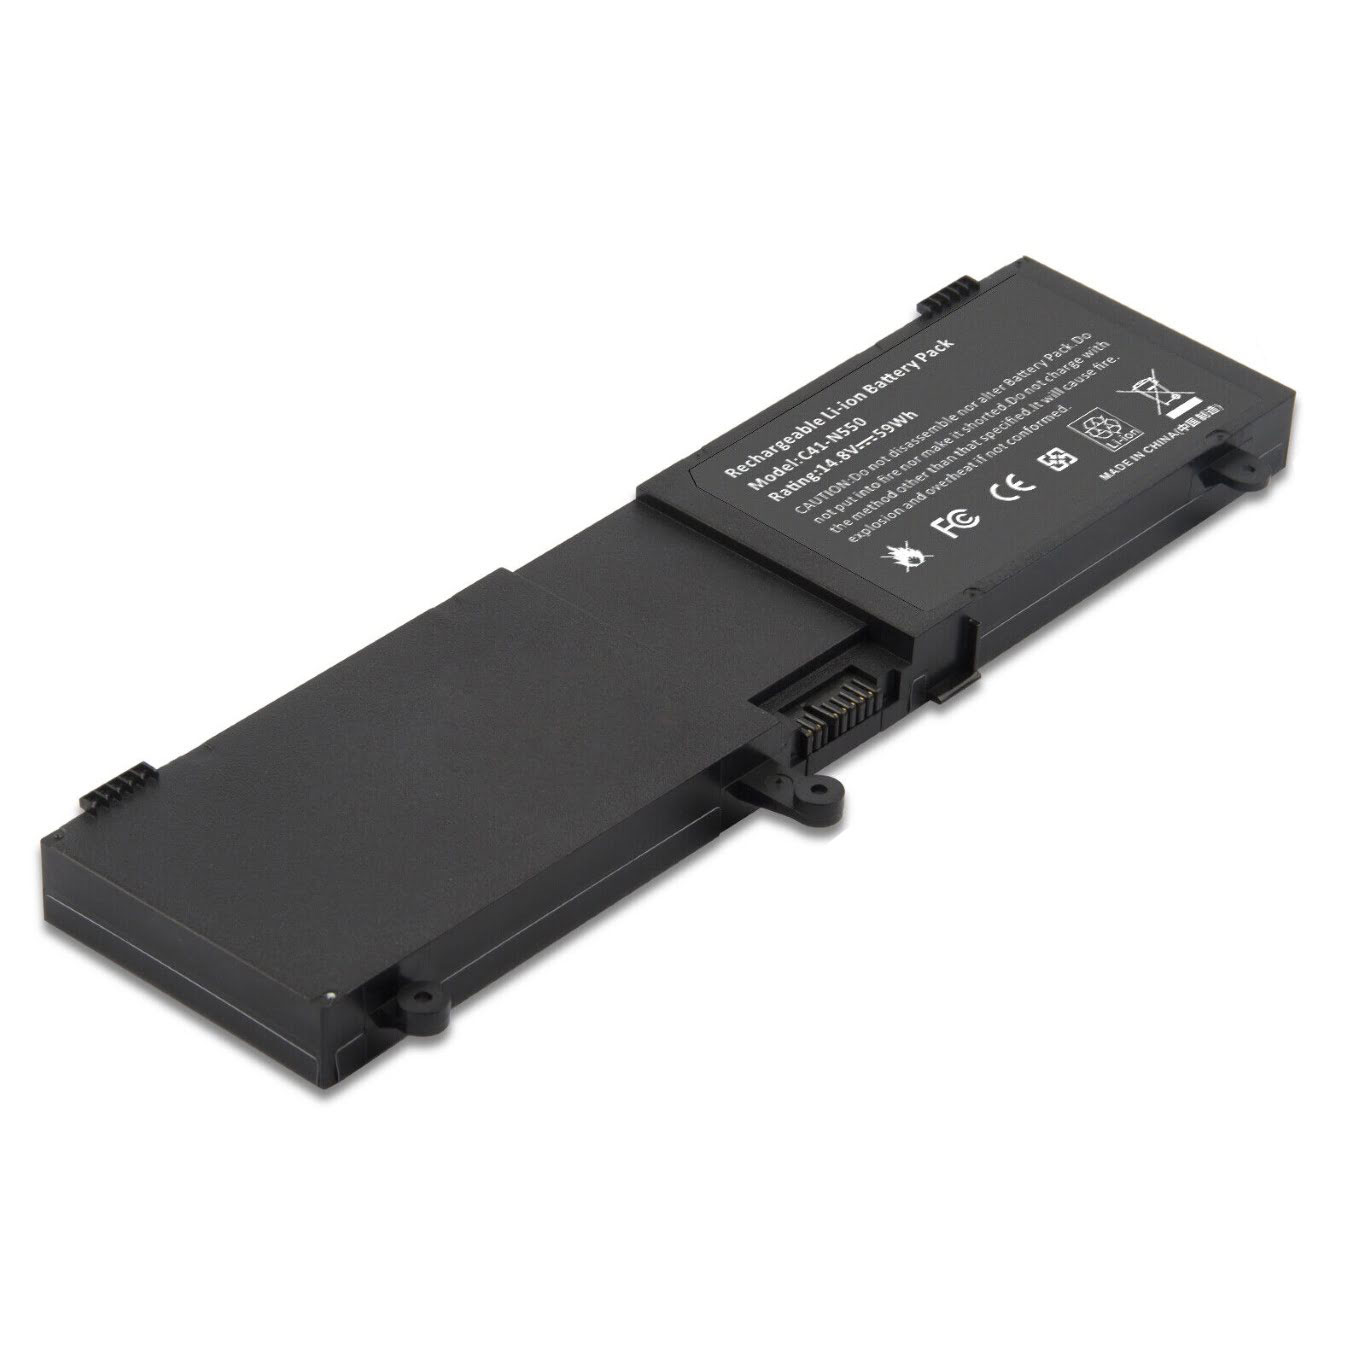 C41-N550 replacement Laptop Battery for Asus G550, G550J, 4 cells, 14.8V, 59wh